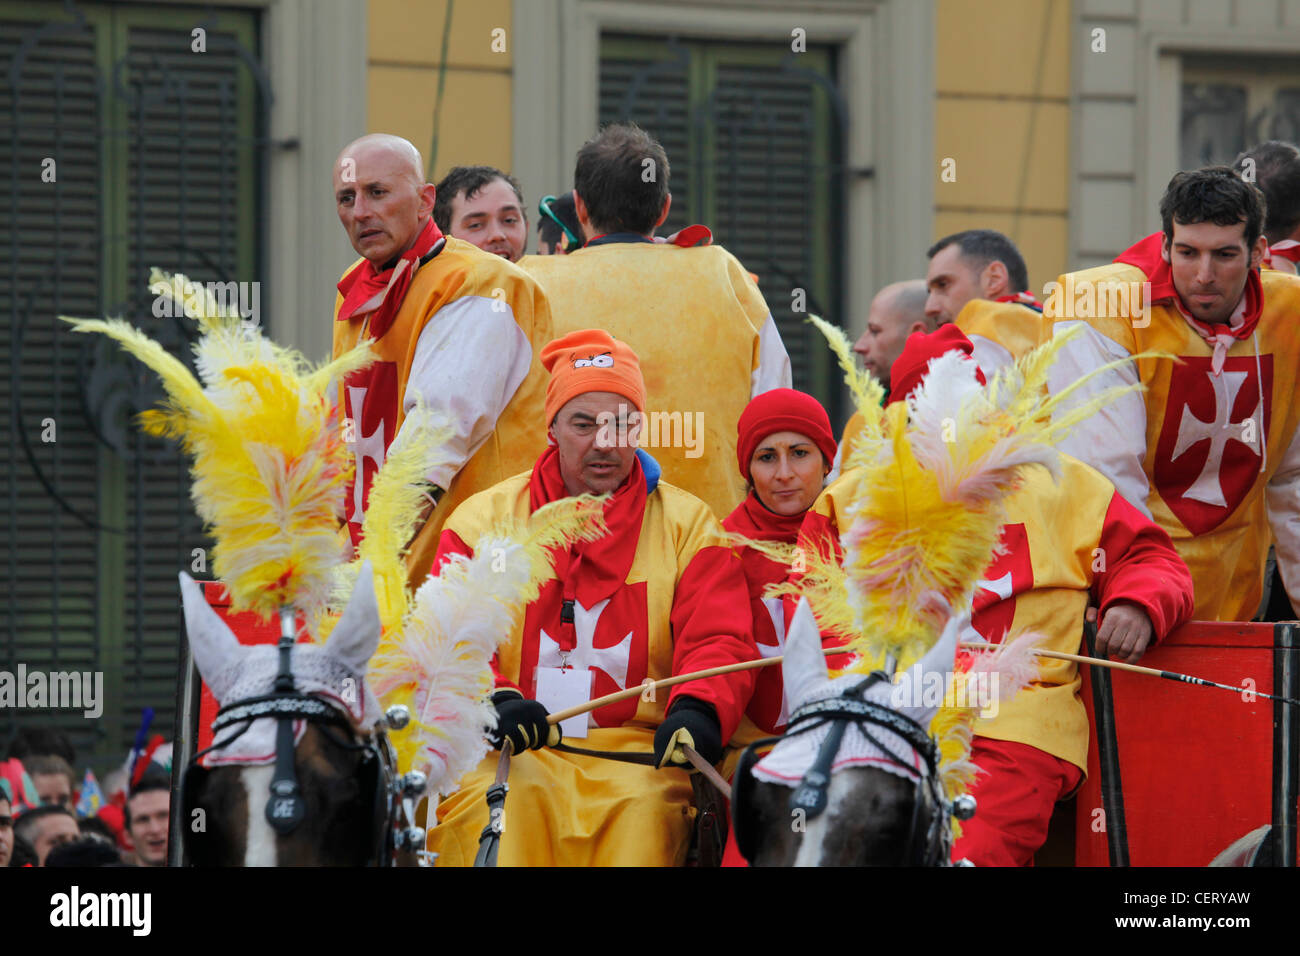 One of the carriages passing by cheering crowds before the Battle of Oranges (Battaglia delle arance) at Ivrea Carnival Stock Photo